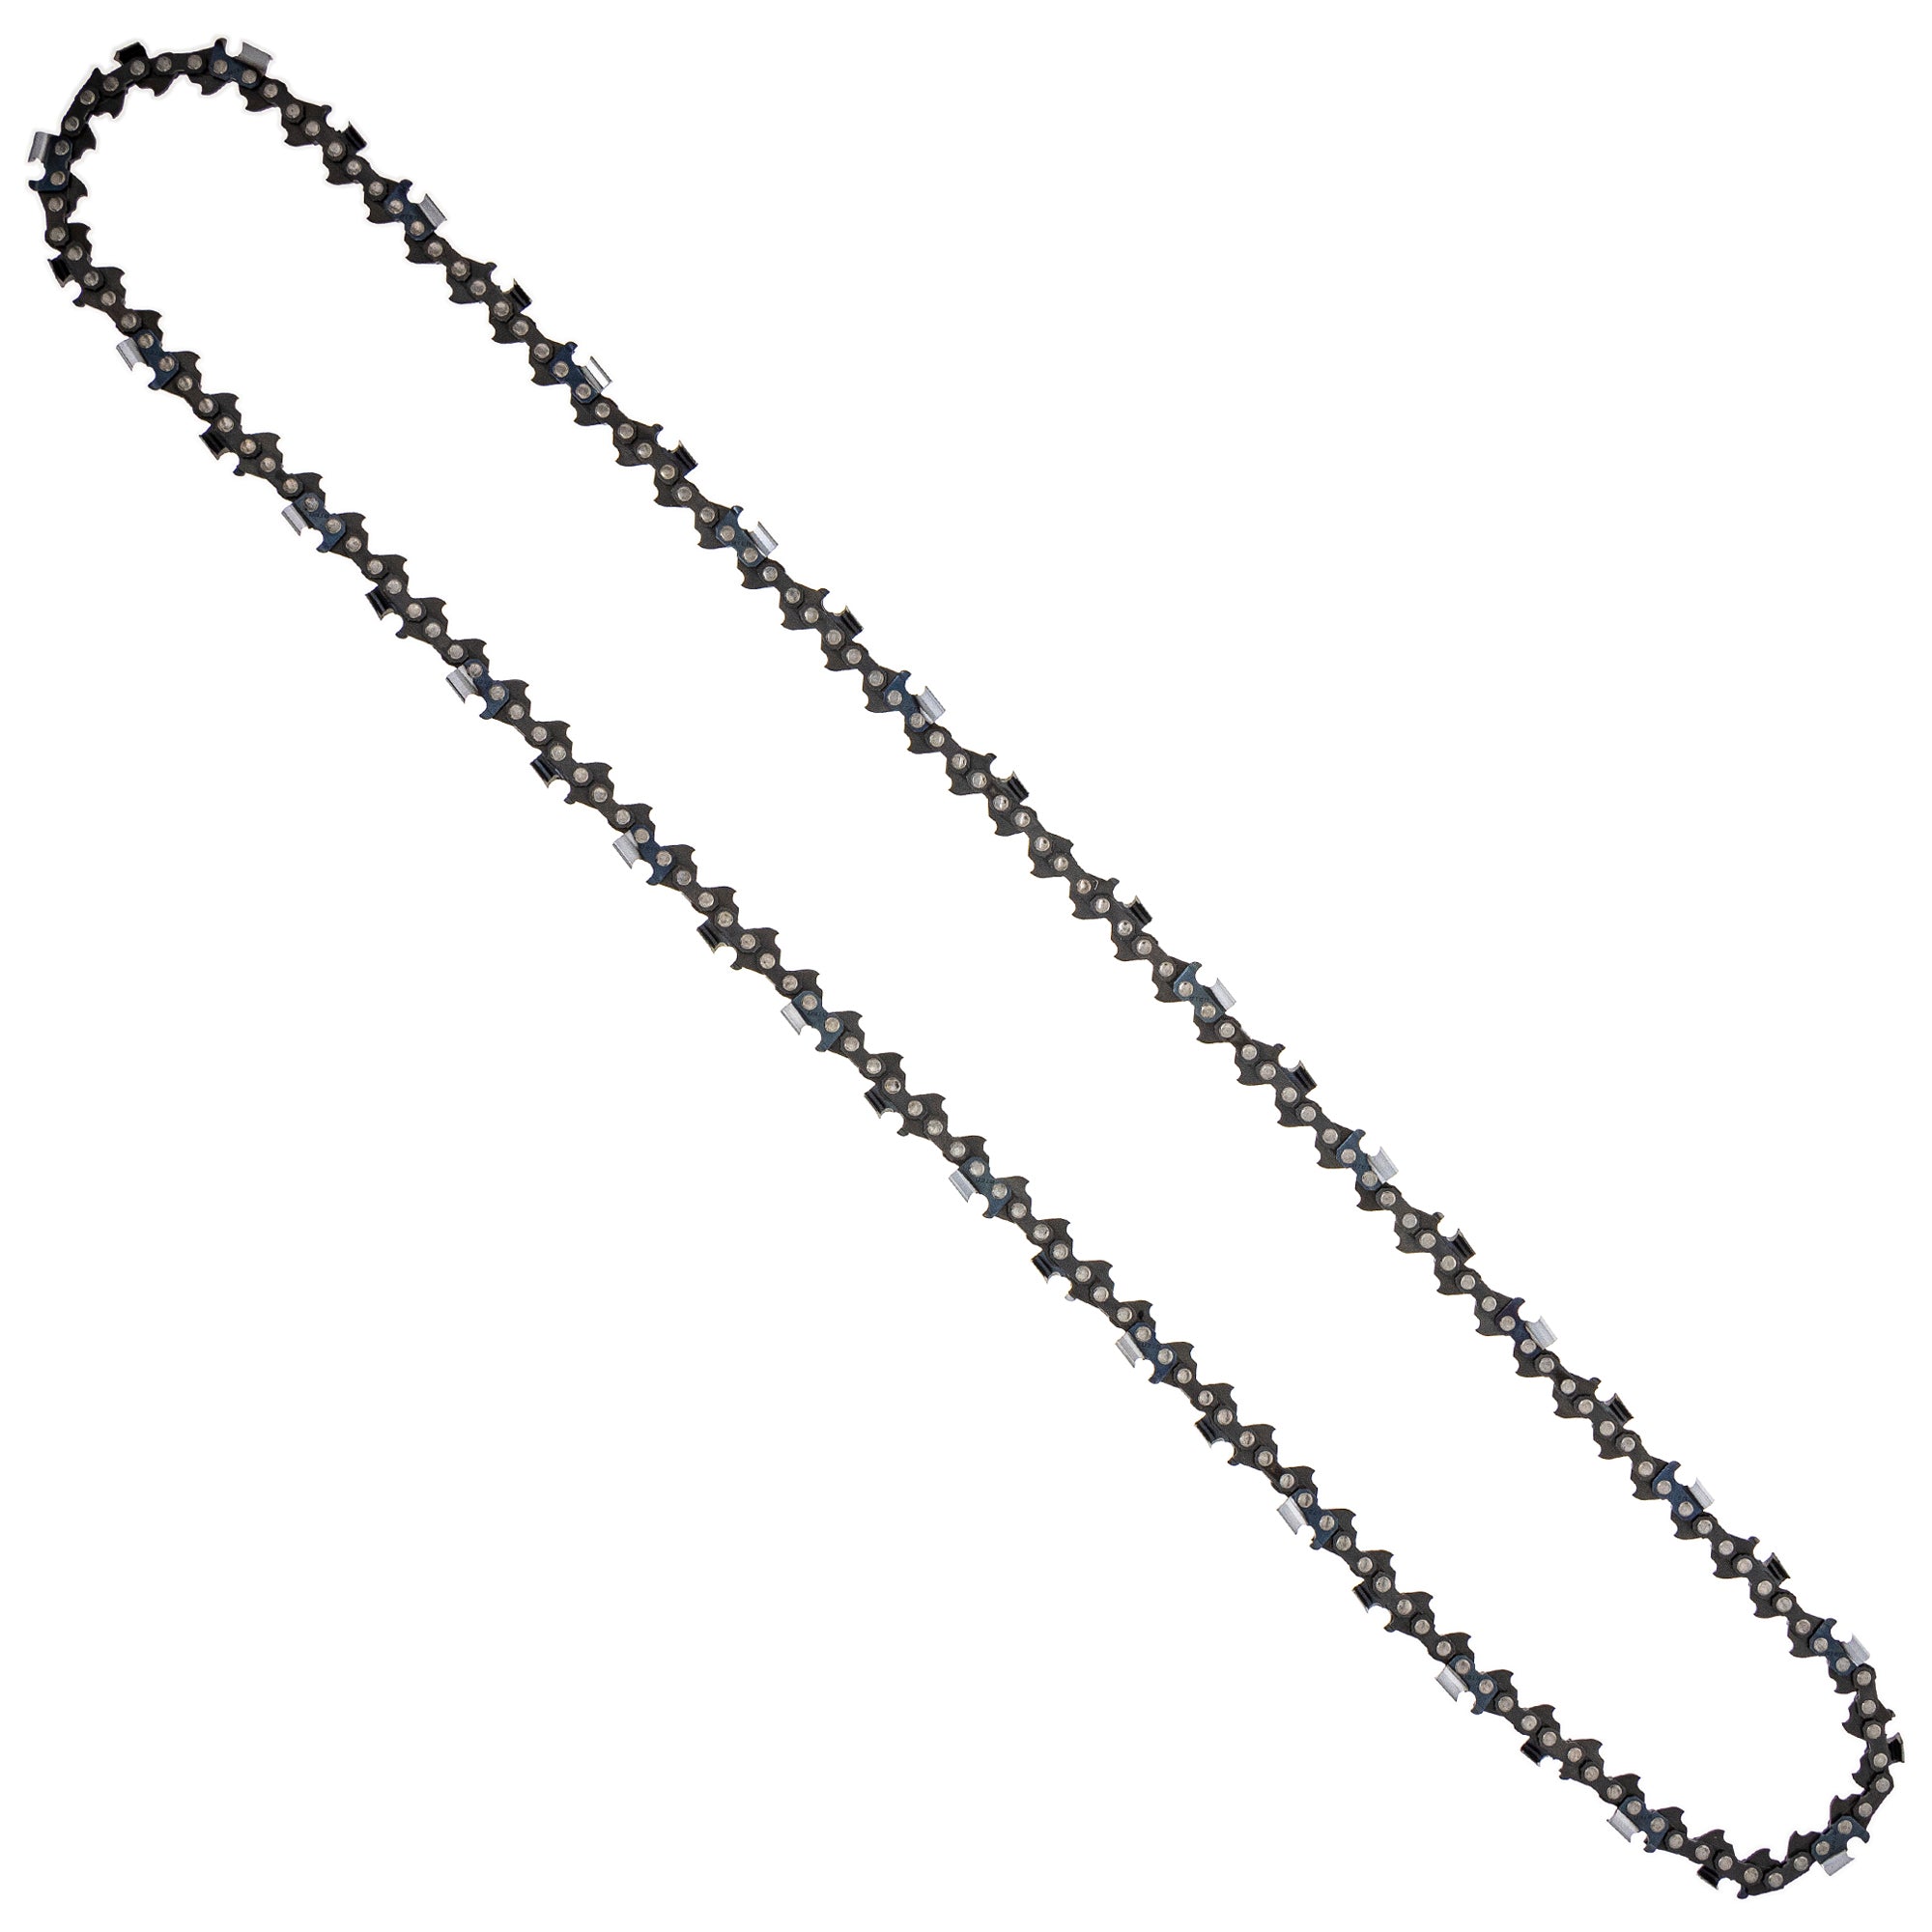 8TEN 810-CCC2352H Chain 5-Pack for zOTHER Oregon MS 066 064 056